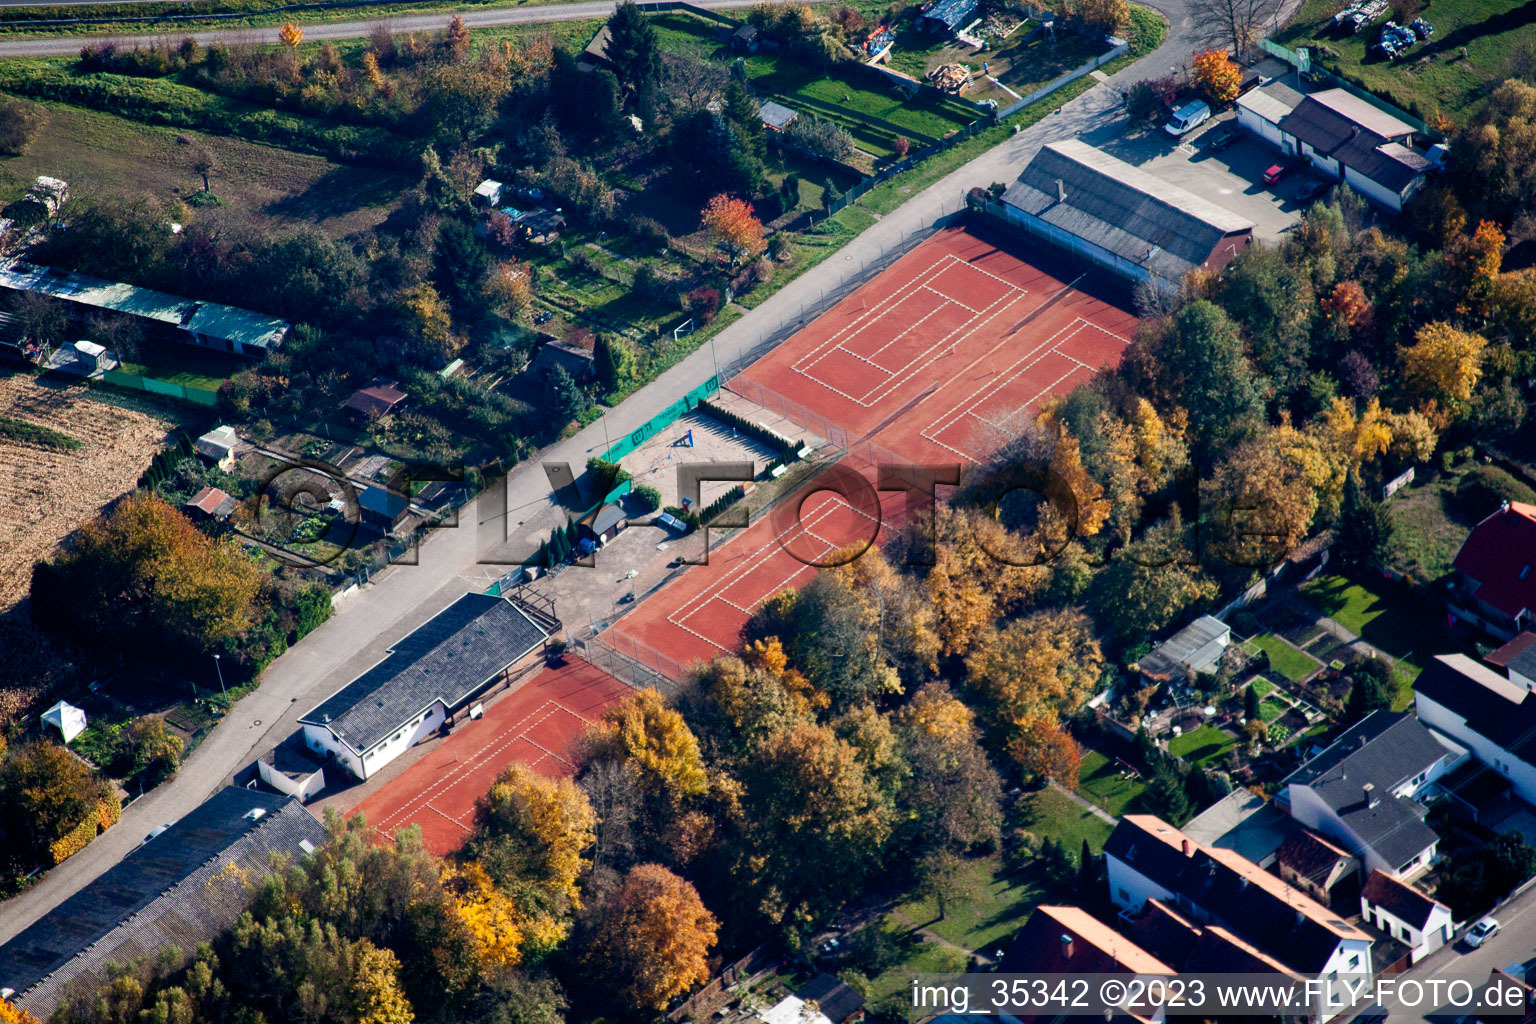 Tennis in Hagenbach in the state Rhineland-Palatinate, Germany